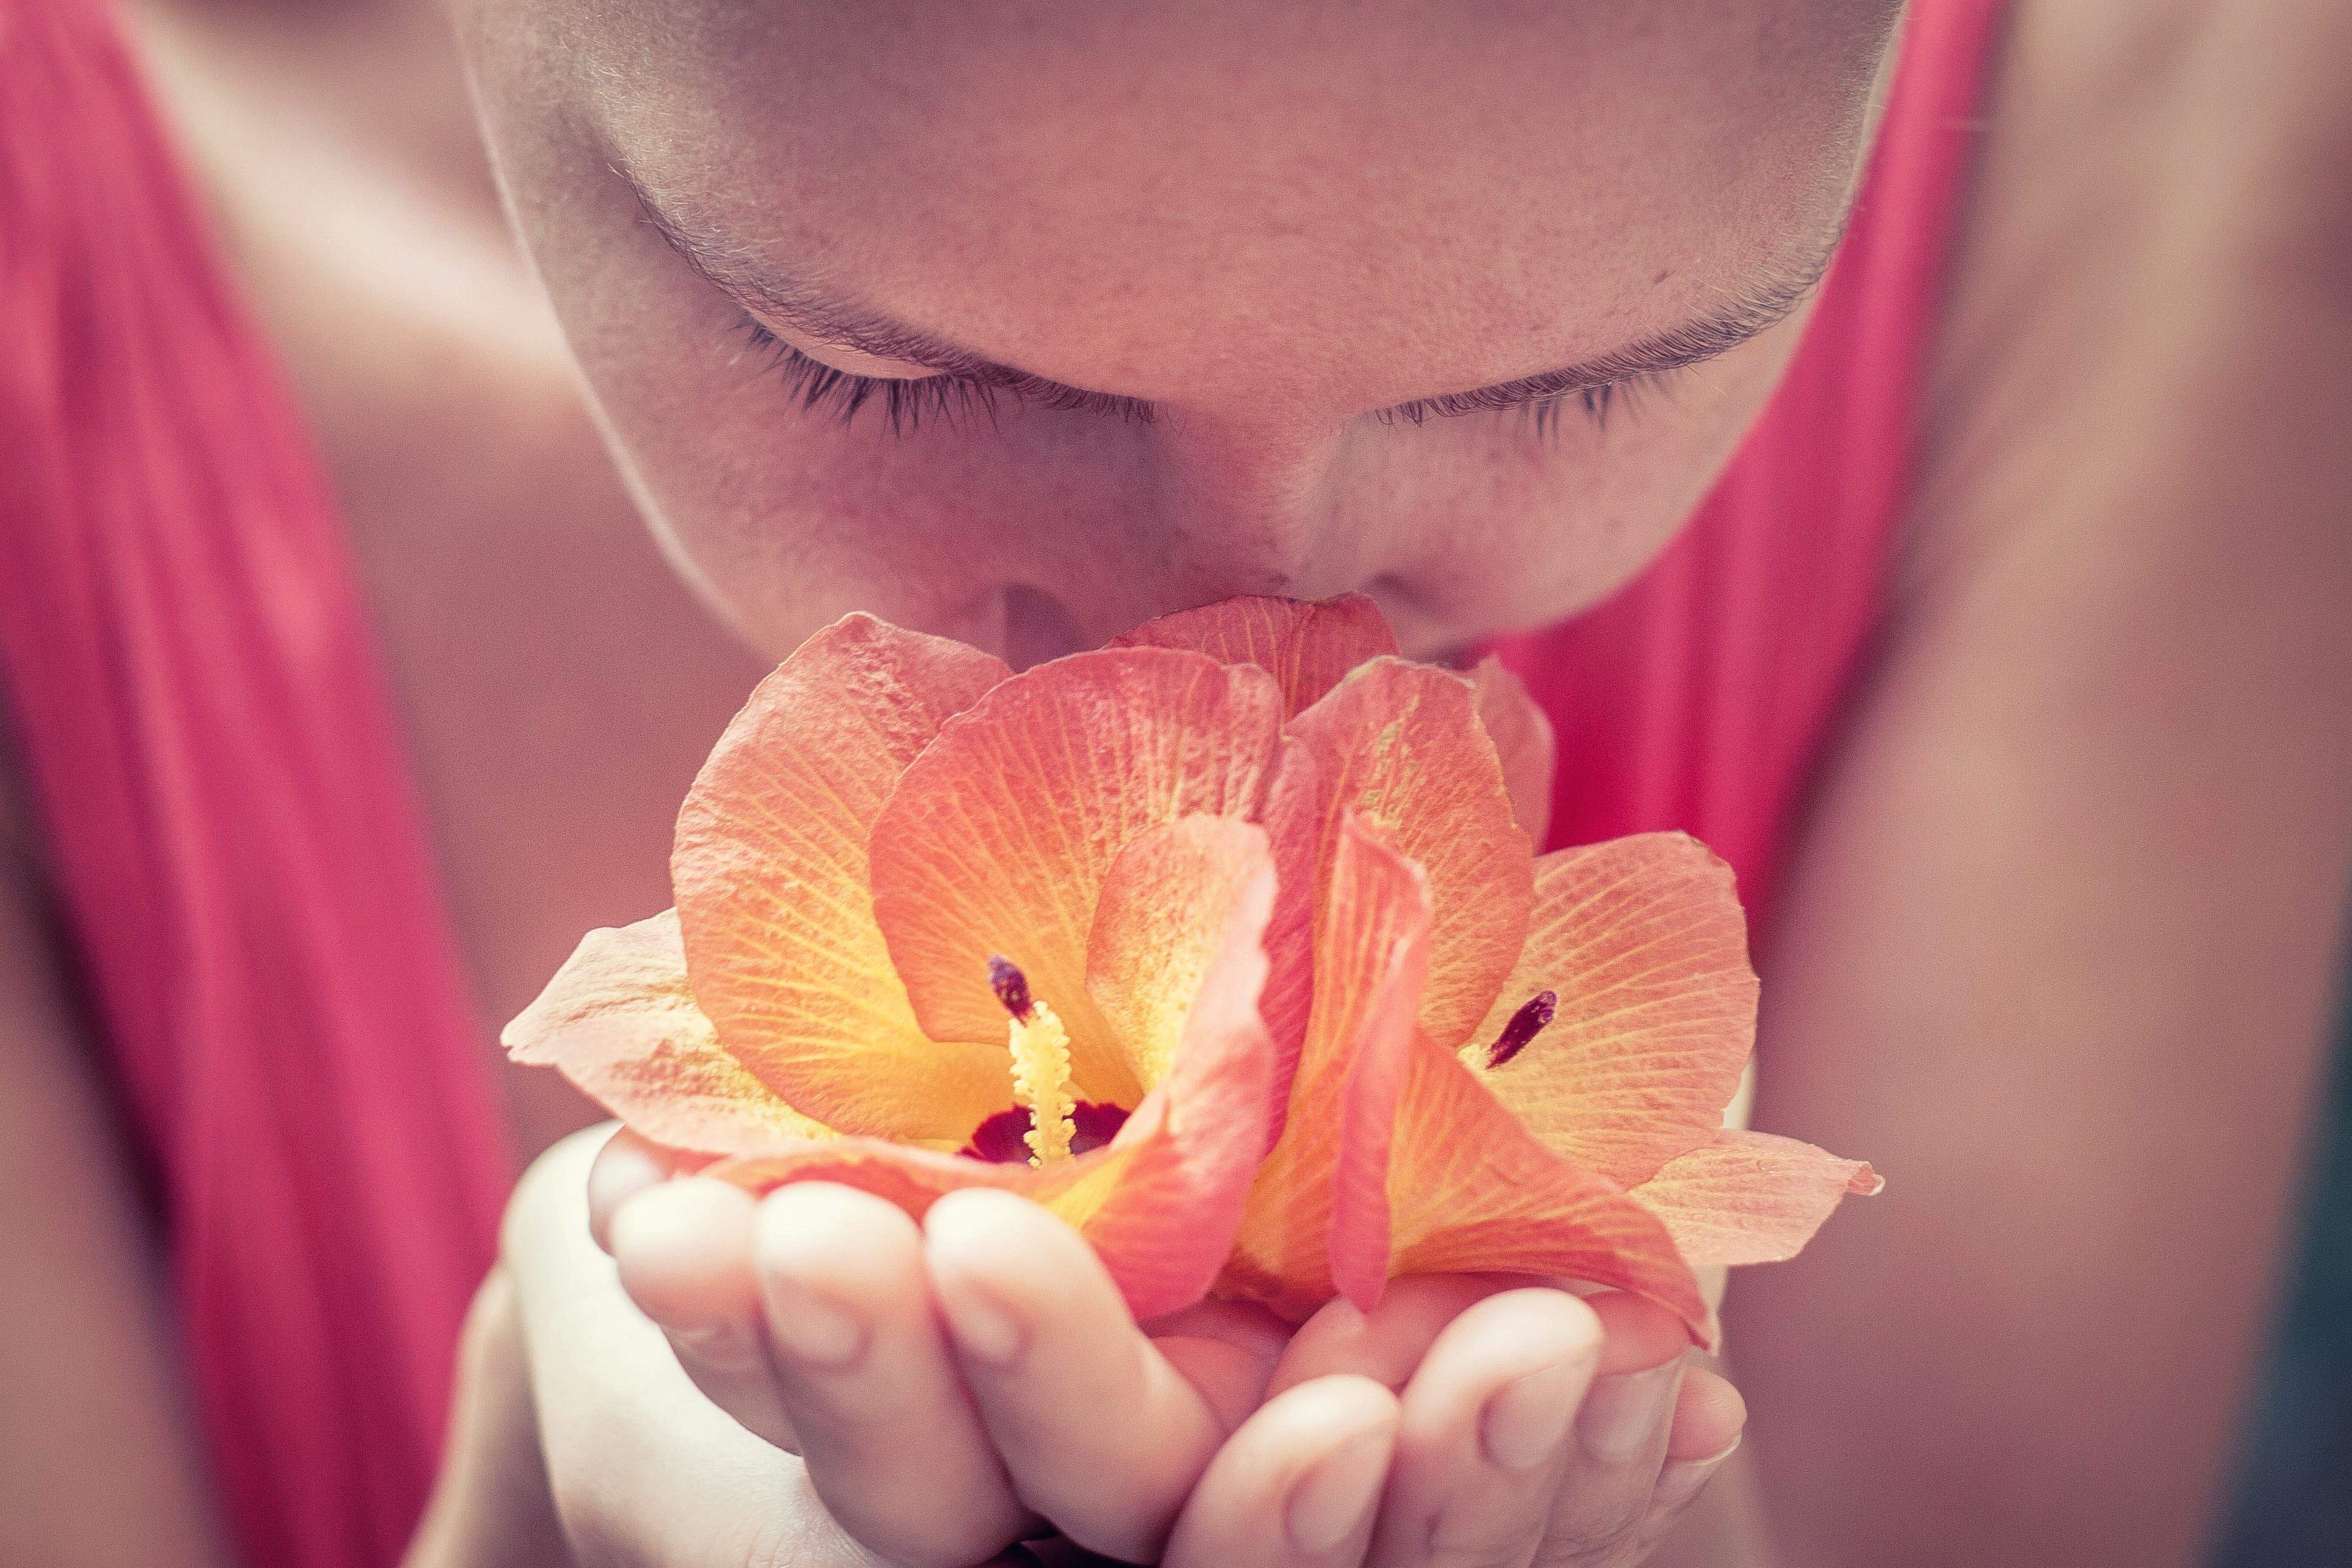 woman smelling flowers/easy jouranling ideas